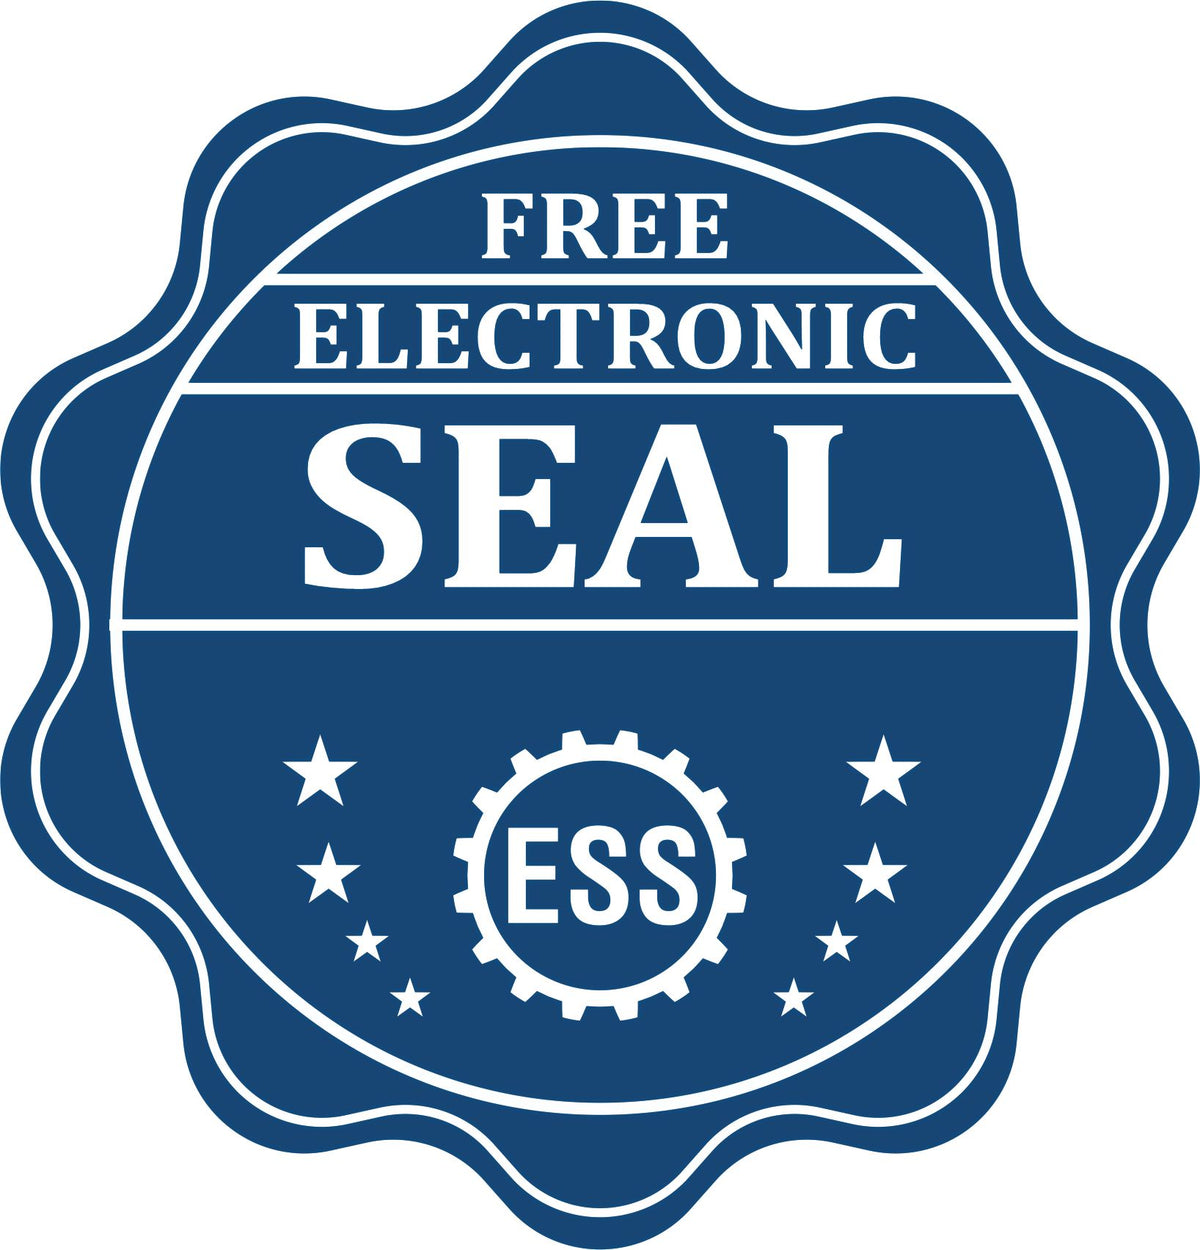 A badge showing a free electronic seal for the Heavy Duty Cast Iron Alaska Land Surveyor Seal Embosser with stars and the ESS gear on the emblem.